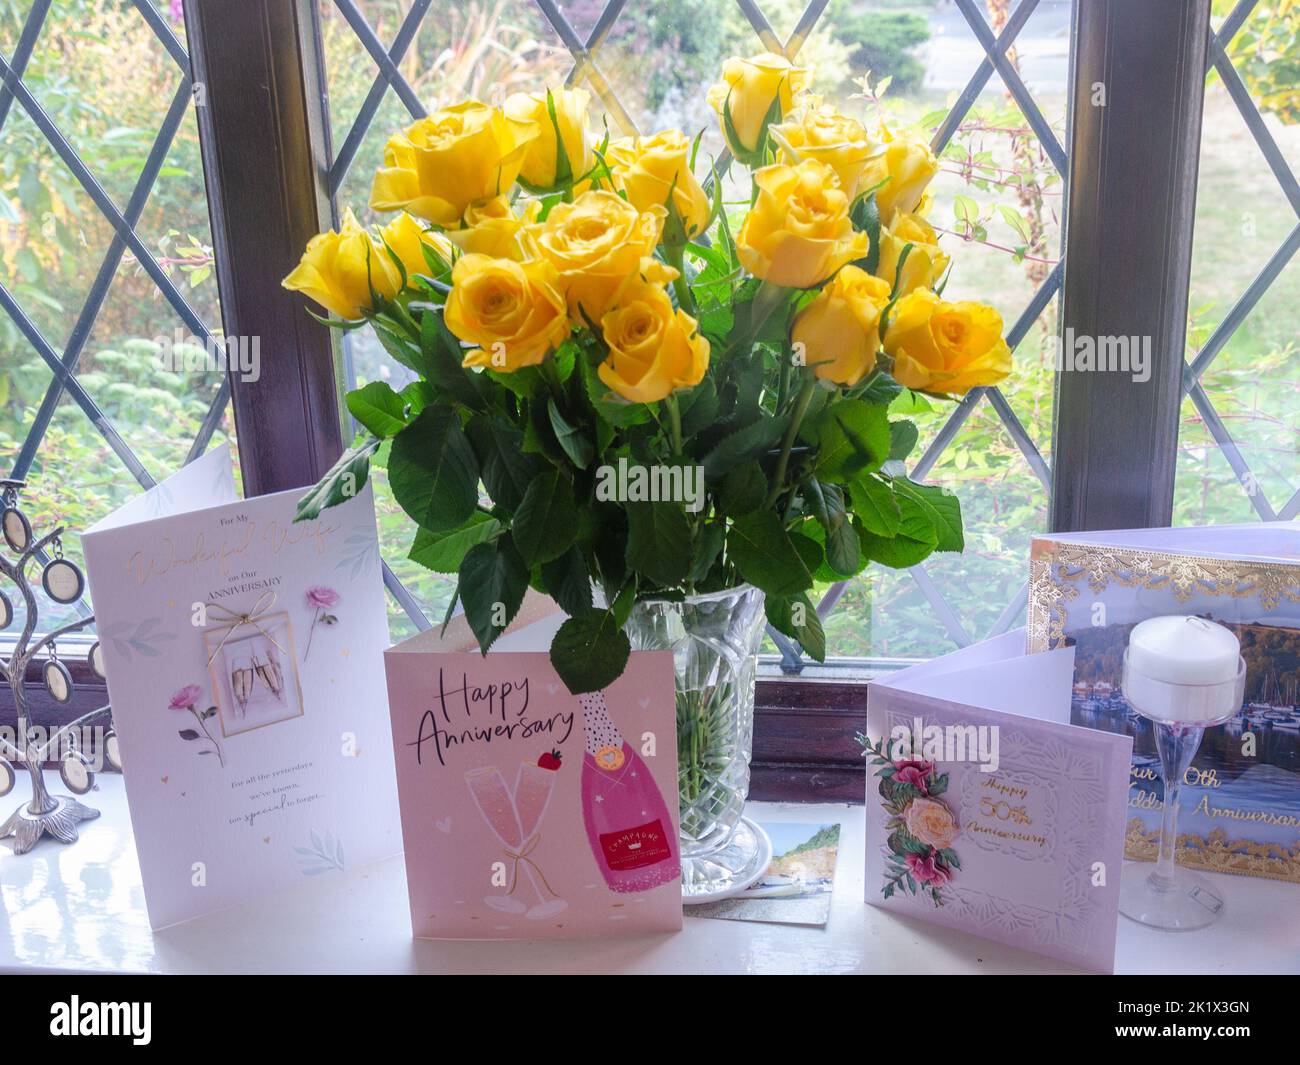 A vase of yellow roses on a lounge window sill with wedding anniversary cards. Stock Photo